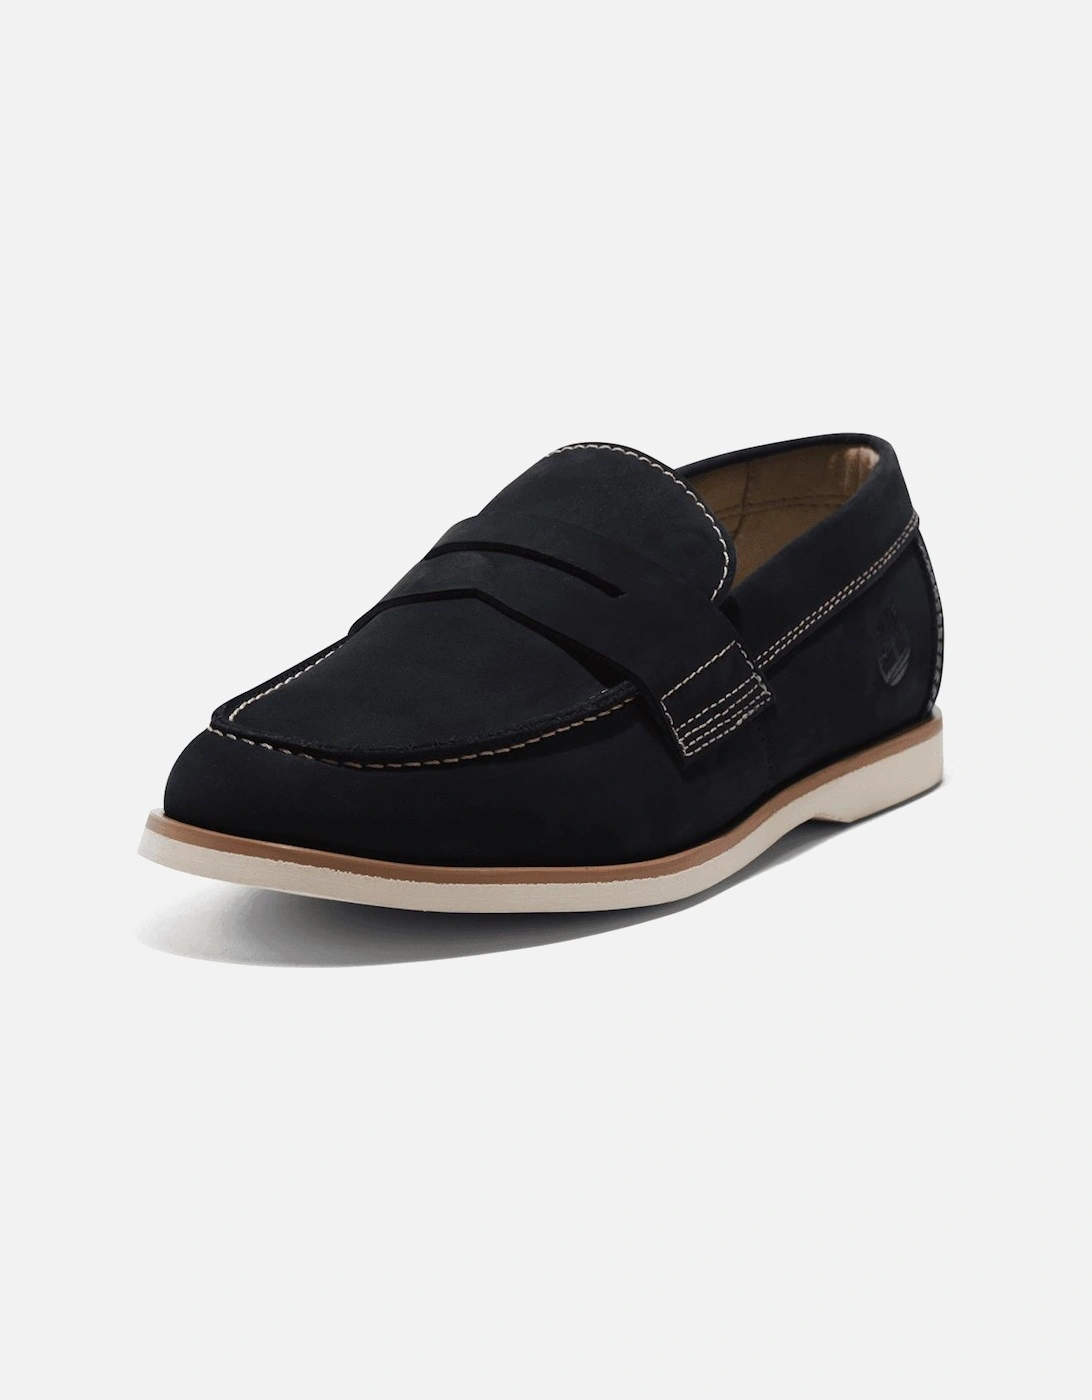 Mens Classic Slip-On Boat Shoes